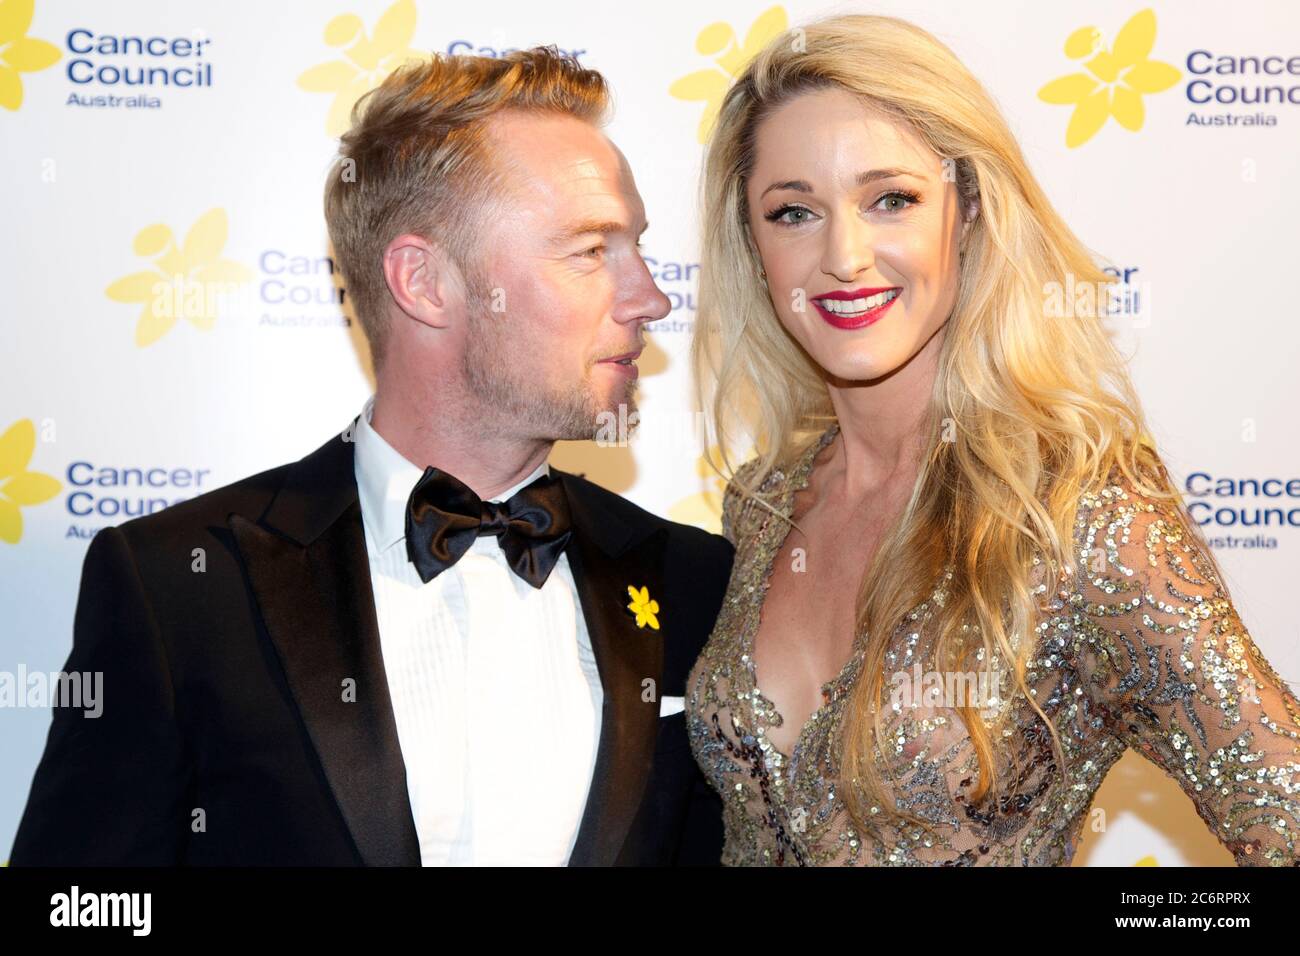 X Factor Australia judge Ronan Keating and Storm Uechtritz arrive on the red carpet for the Emeralds & Ivy Ball 2014 to raise money for Cancer Council Stock Photo